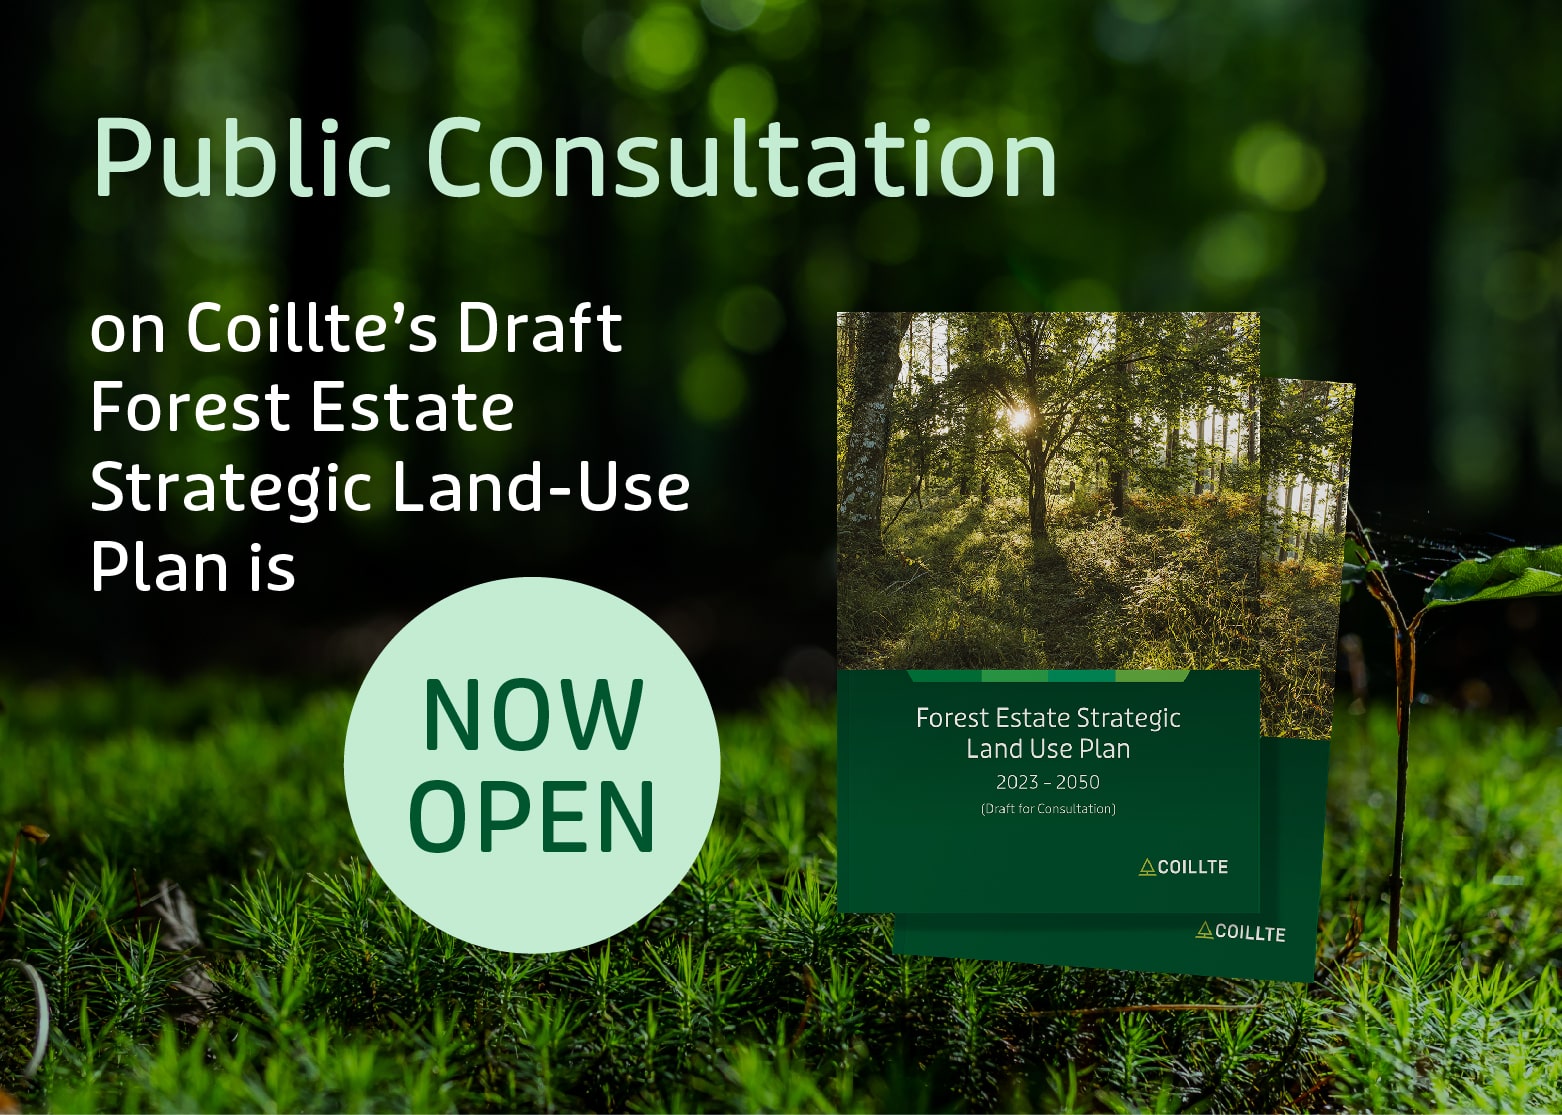 PUBLIC CONSULTATION ON COILLTE’S DRAFT FOREST ESTATE STRATEGIC LAND-USE PLAN IS NOW OPEN